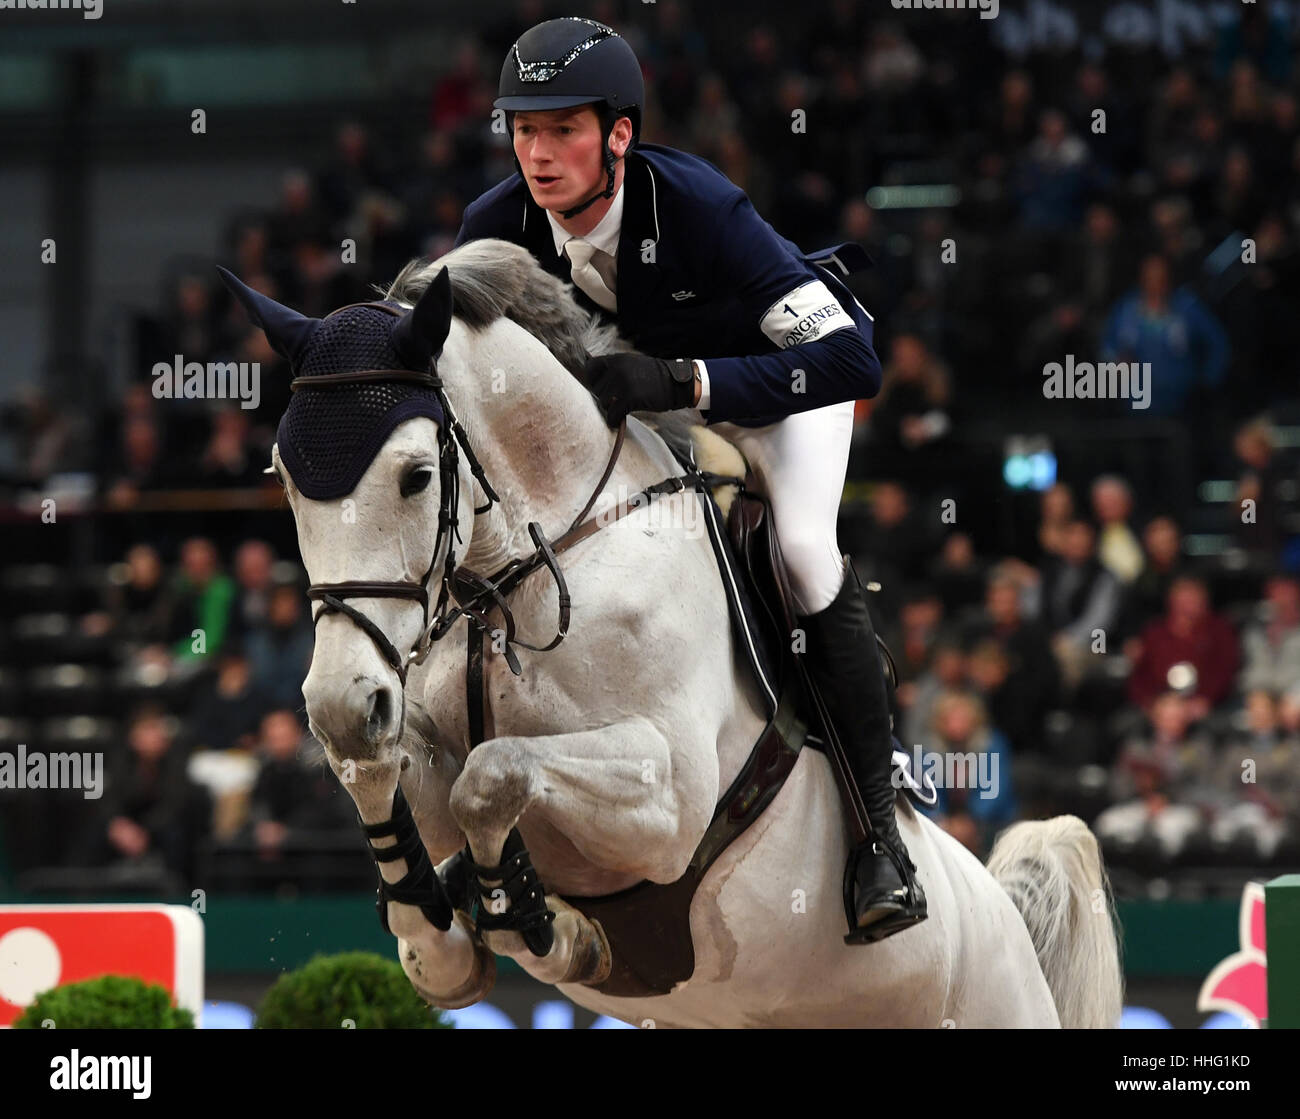 Leipzig, Germany. 19th Jan, 2017. German show jumper Daniel Deusser and his horse Zaia di San Giovanni in action during the 'Kask Youngster Cup' of the 'Partner Pferd' (lit. 'Partner Horse') fair in Leipzig, Germany, 19 January 2017. The fair continues until Sunday, 22 January 2017. Highlight will be the finale in the Jumping World Cup. Photo: Hendrik Schmidt/dpa-Zentralbild/dpa/Alamy Live News Stock Photo